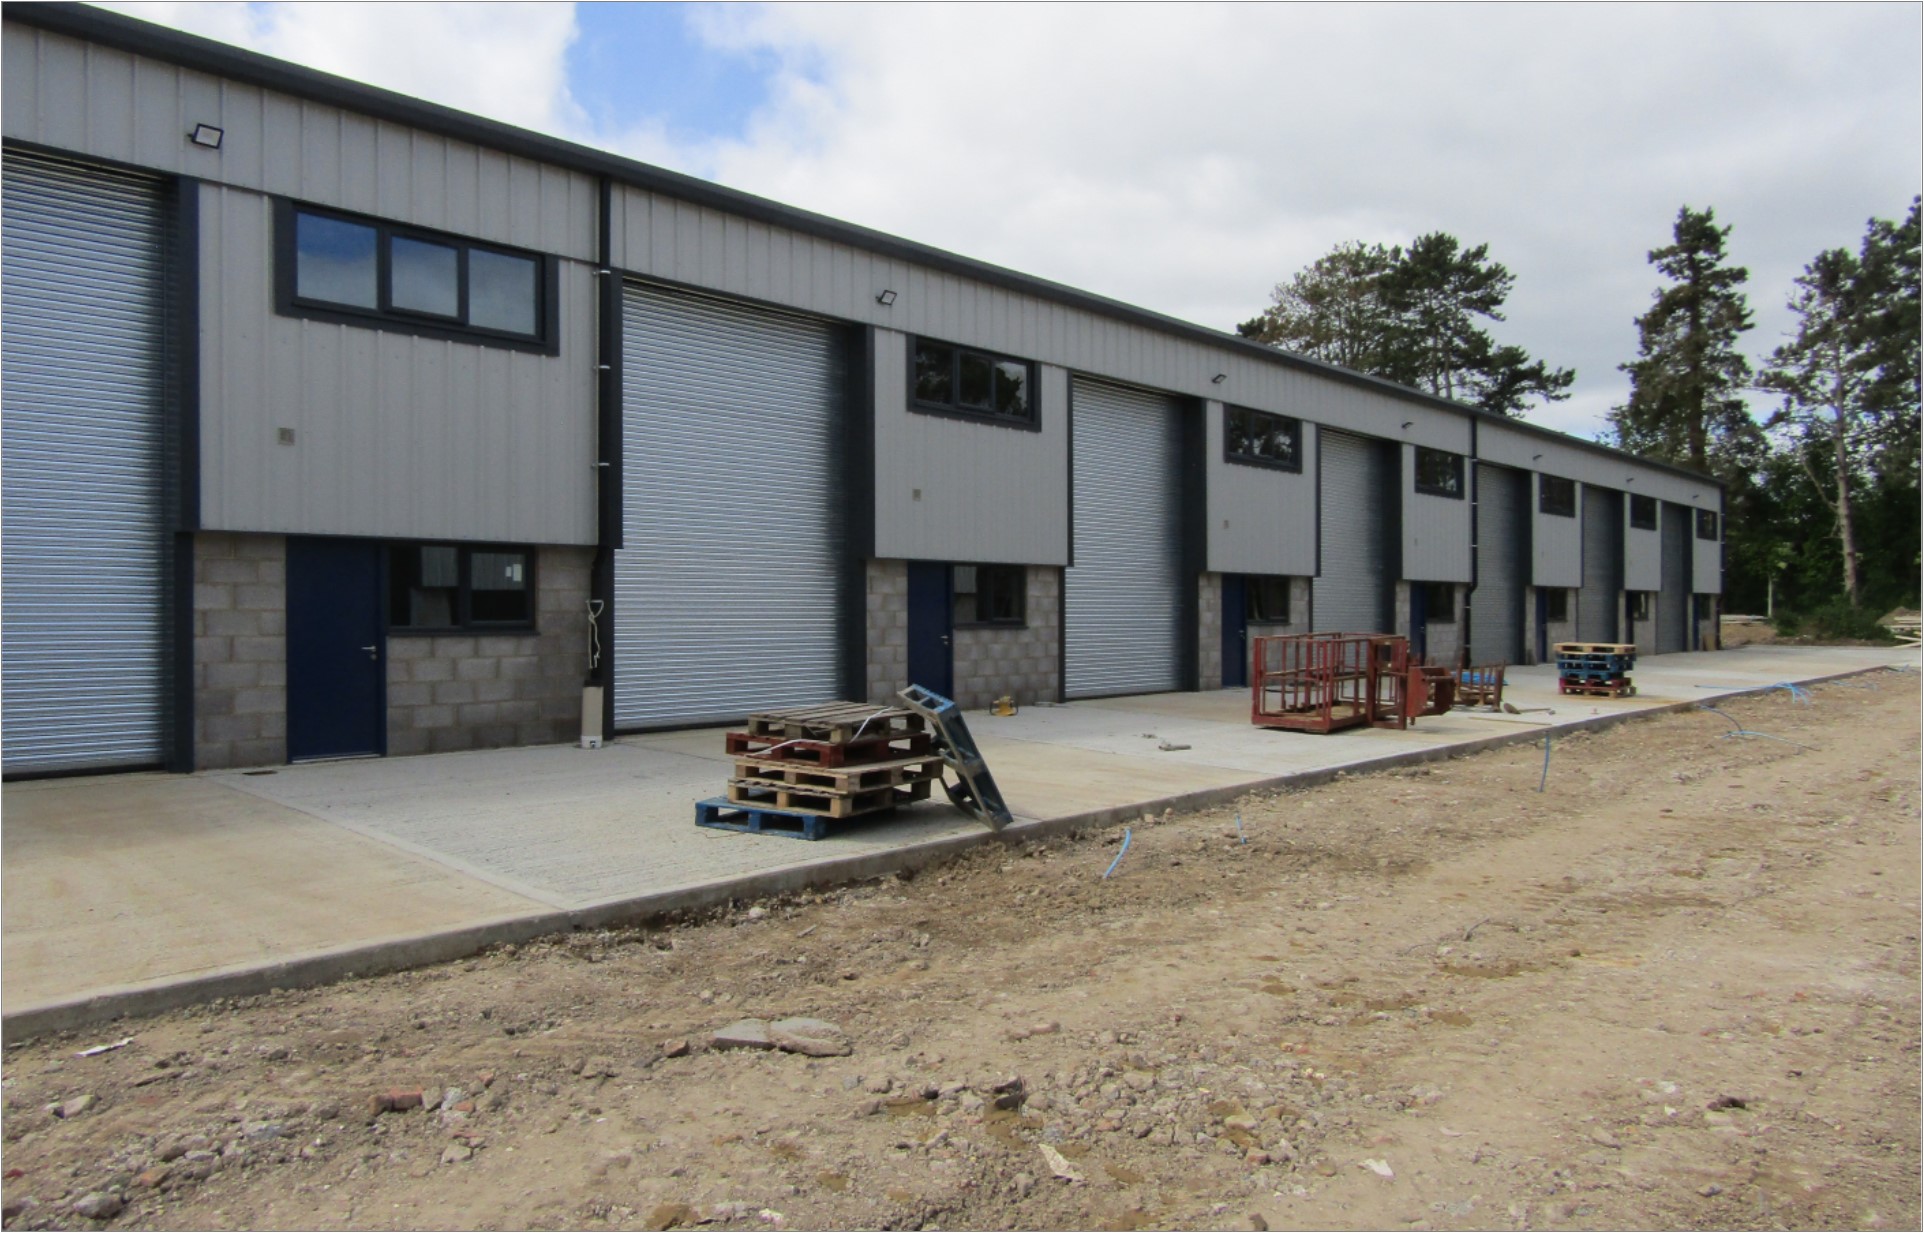 The Firs, Watermill Industrial Estate, Aspenden Road, Buntingford